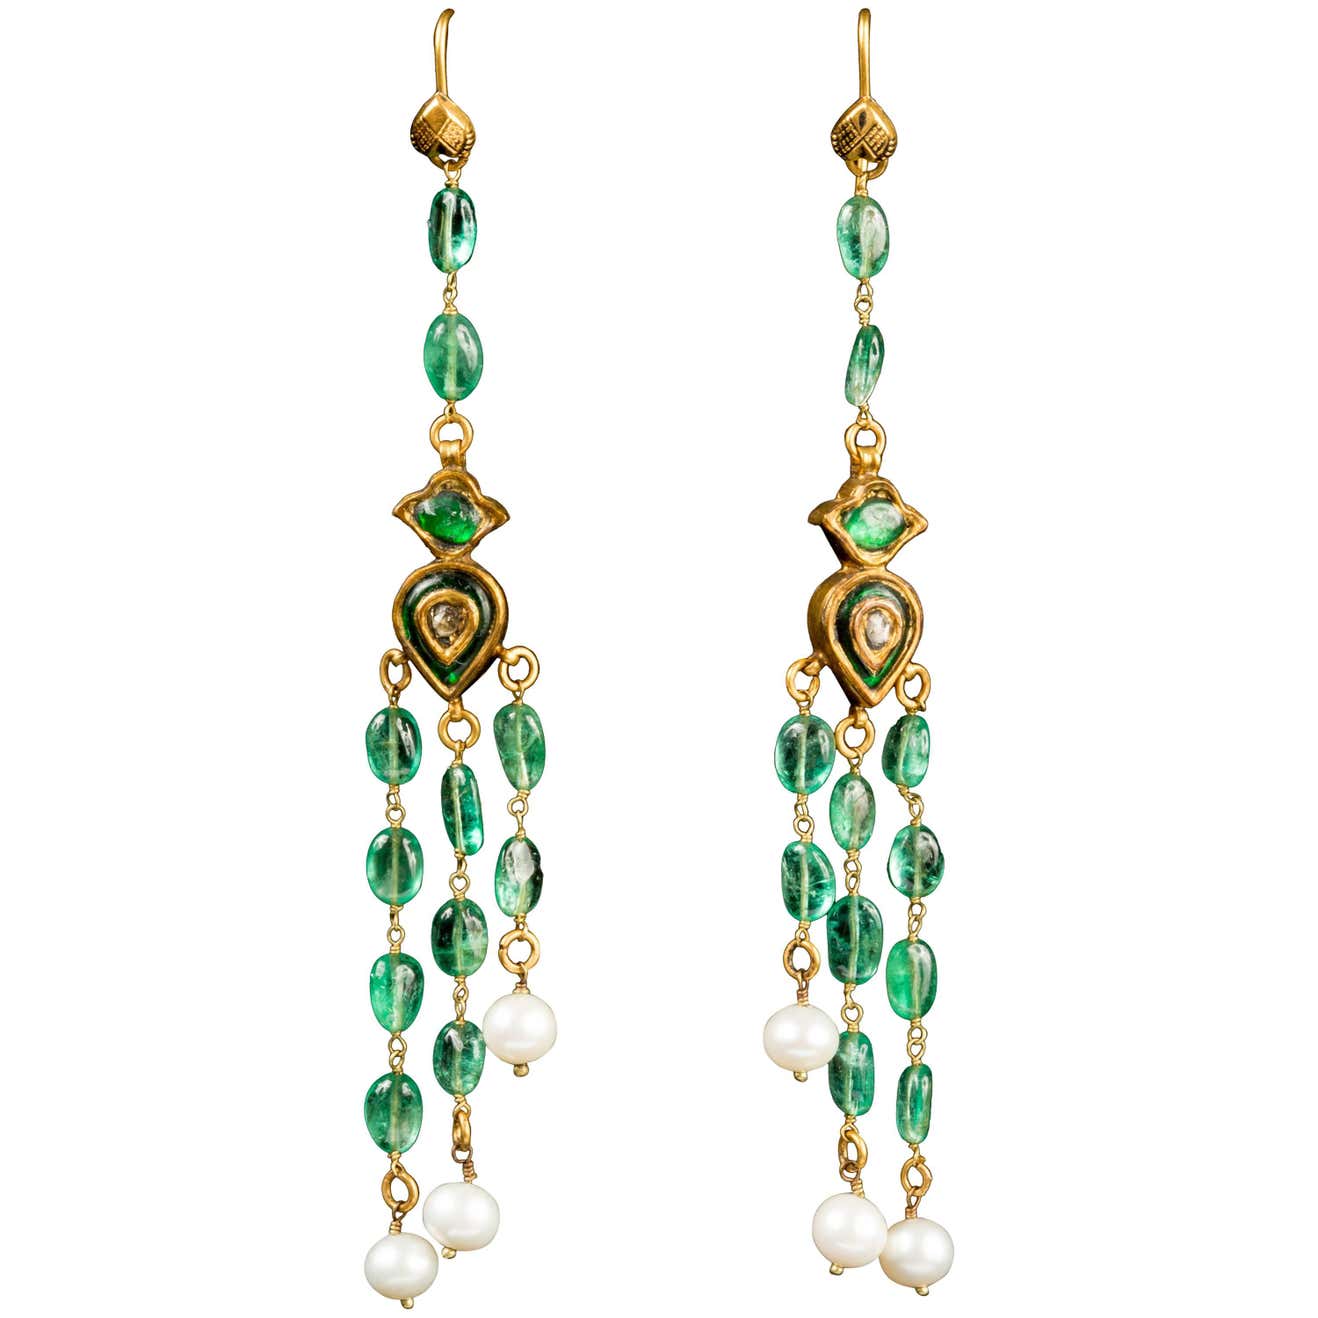 Old Emerald Cascade Earrings with Diamond in the Centre and Three Basra ...